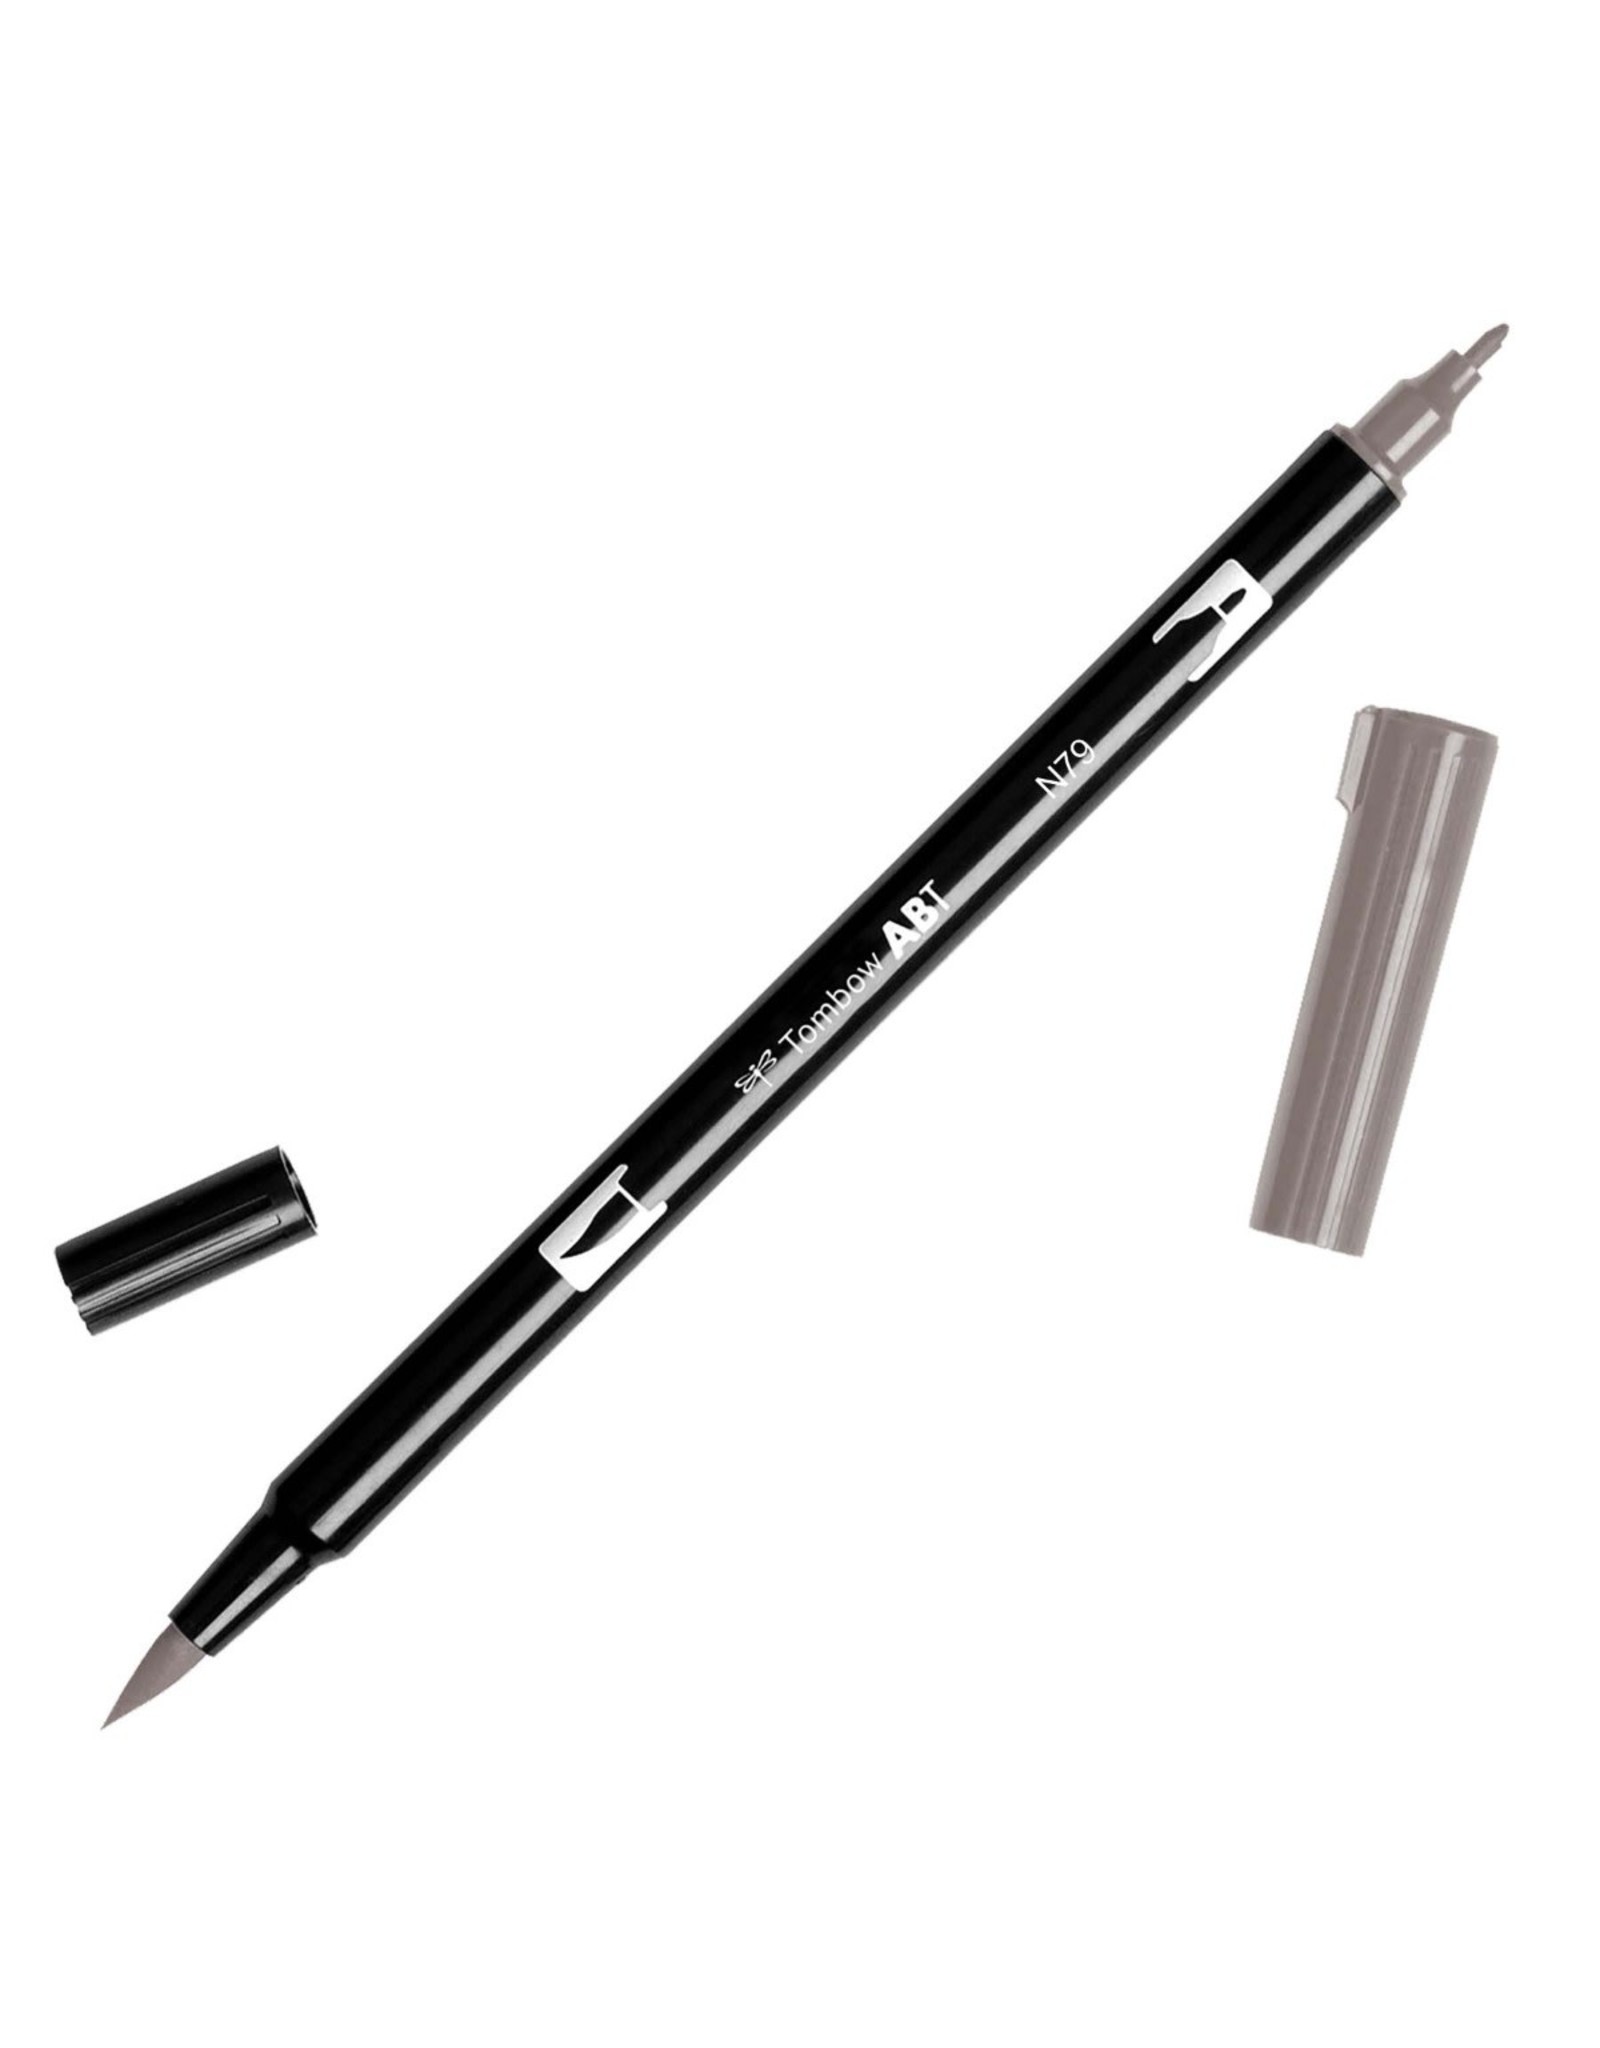 TOMBOW TOMBOW ABT-N79 WARM GRAY 2 DUAL BRUSH MARKER